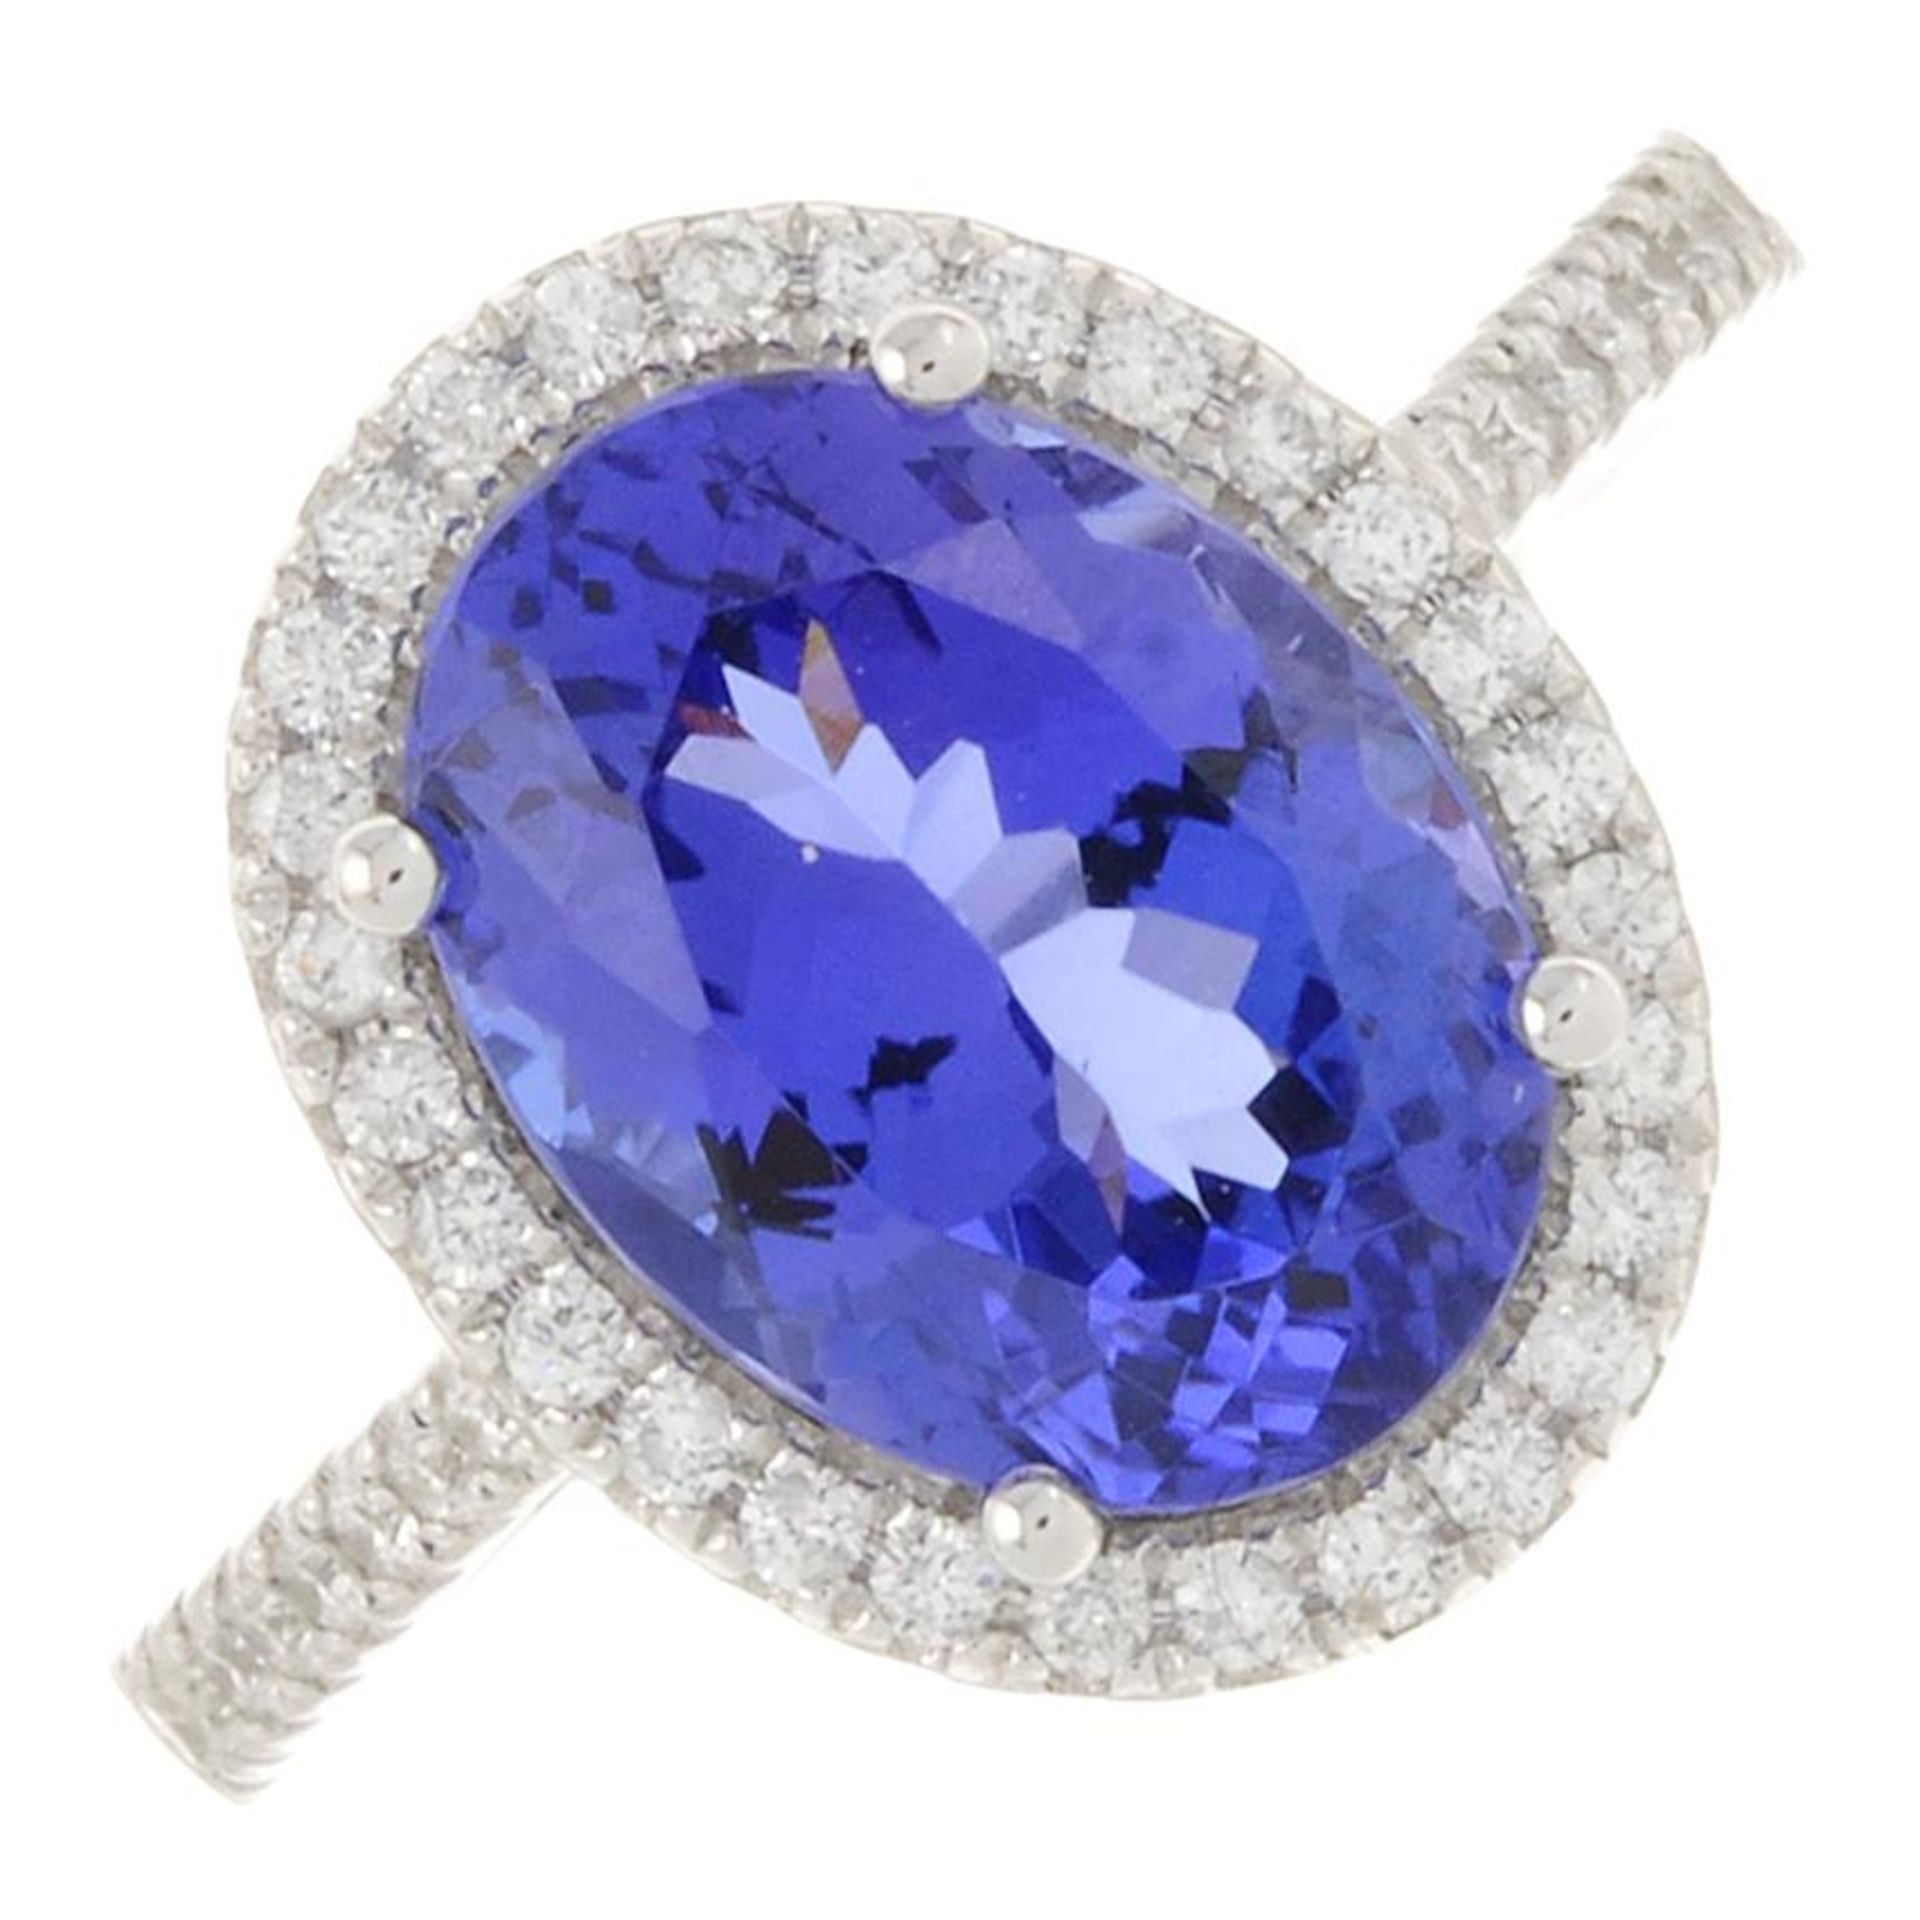 An 18ct gold tanzanite ring, with brilliant-cut diamond surround and sides.